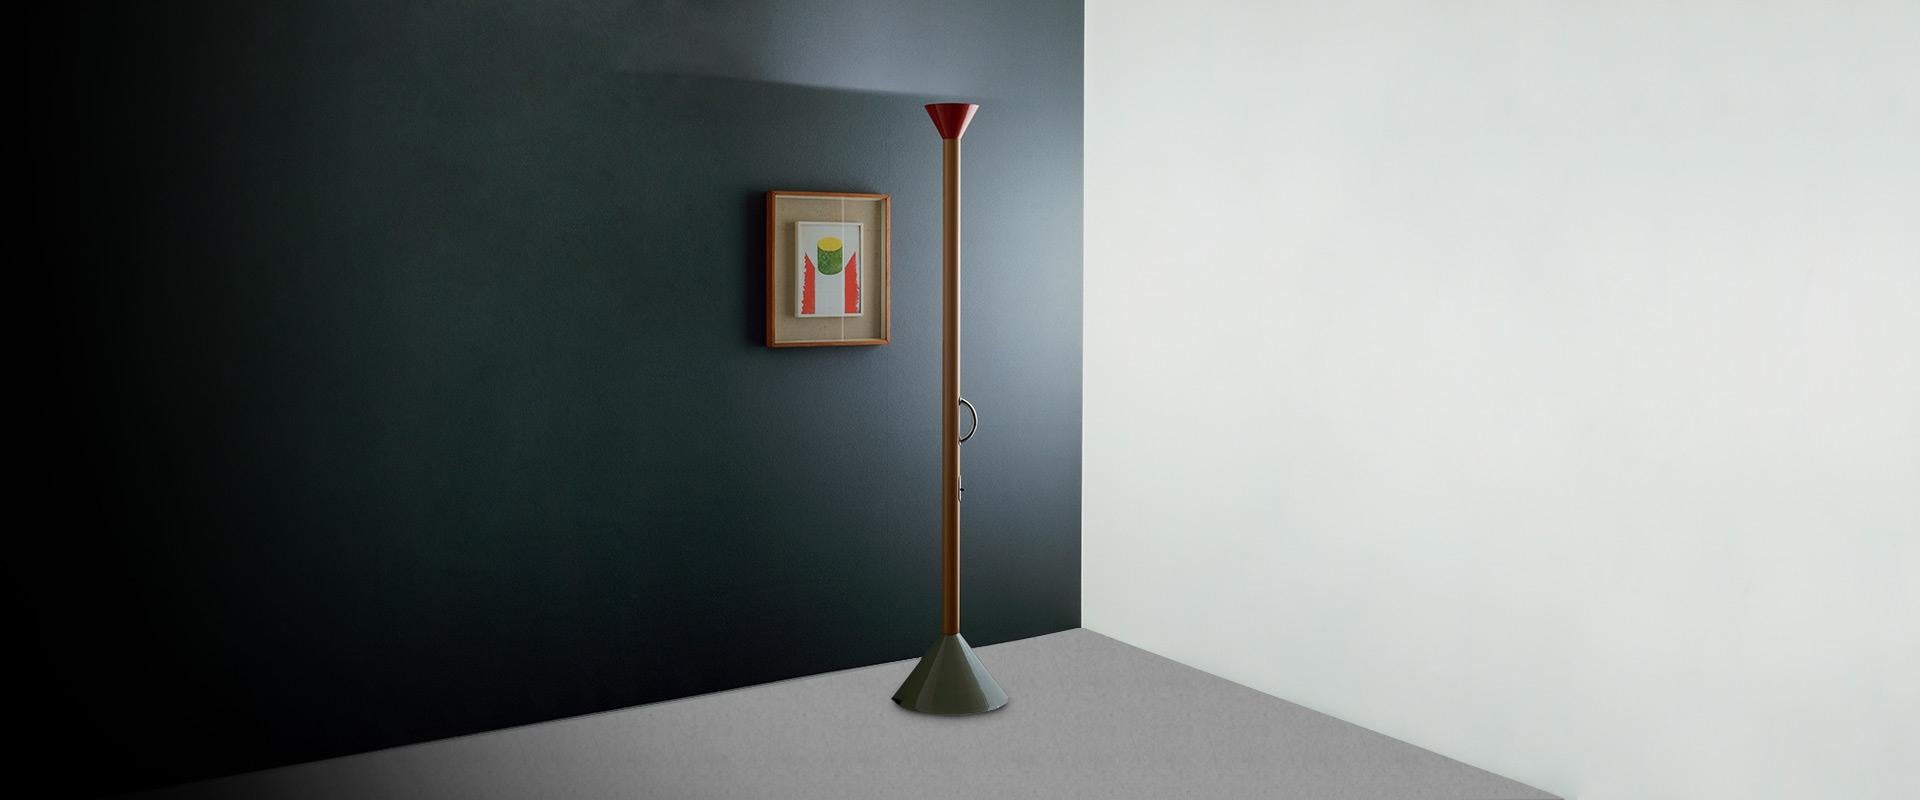 Ettore Sottsass Callimaco floor lamp for Artemide. 

Originally created in 1982, Ettore Sottsass’ “horn” of light creates the remarkable illusion of an oversized musical instrument. This iconic floor lamp from Ettore Sottsass was reintroduced to the